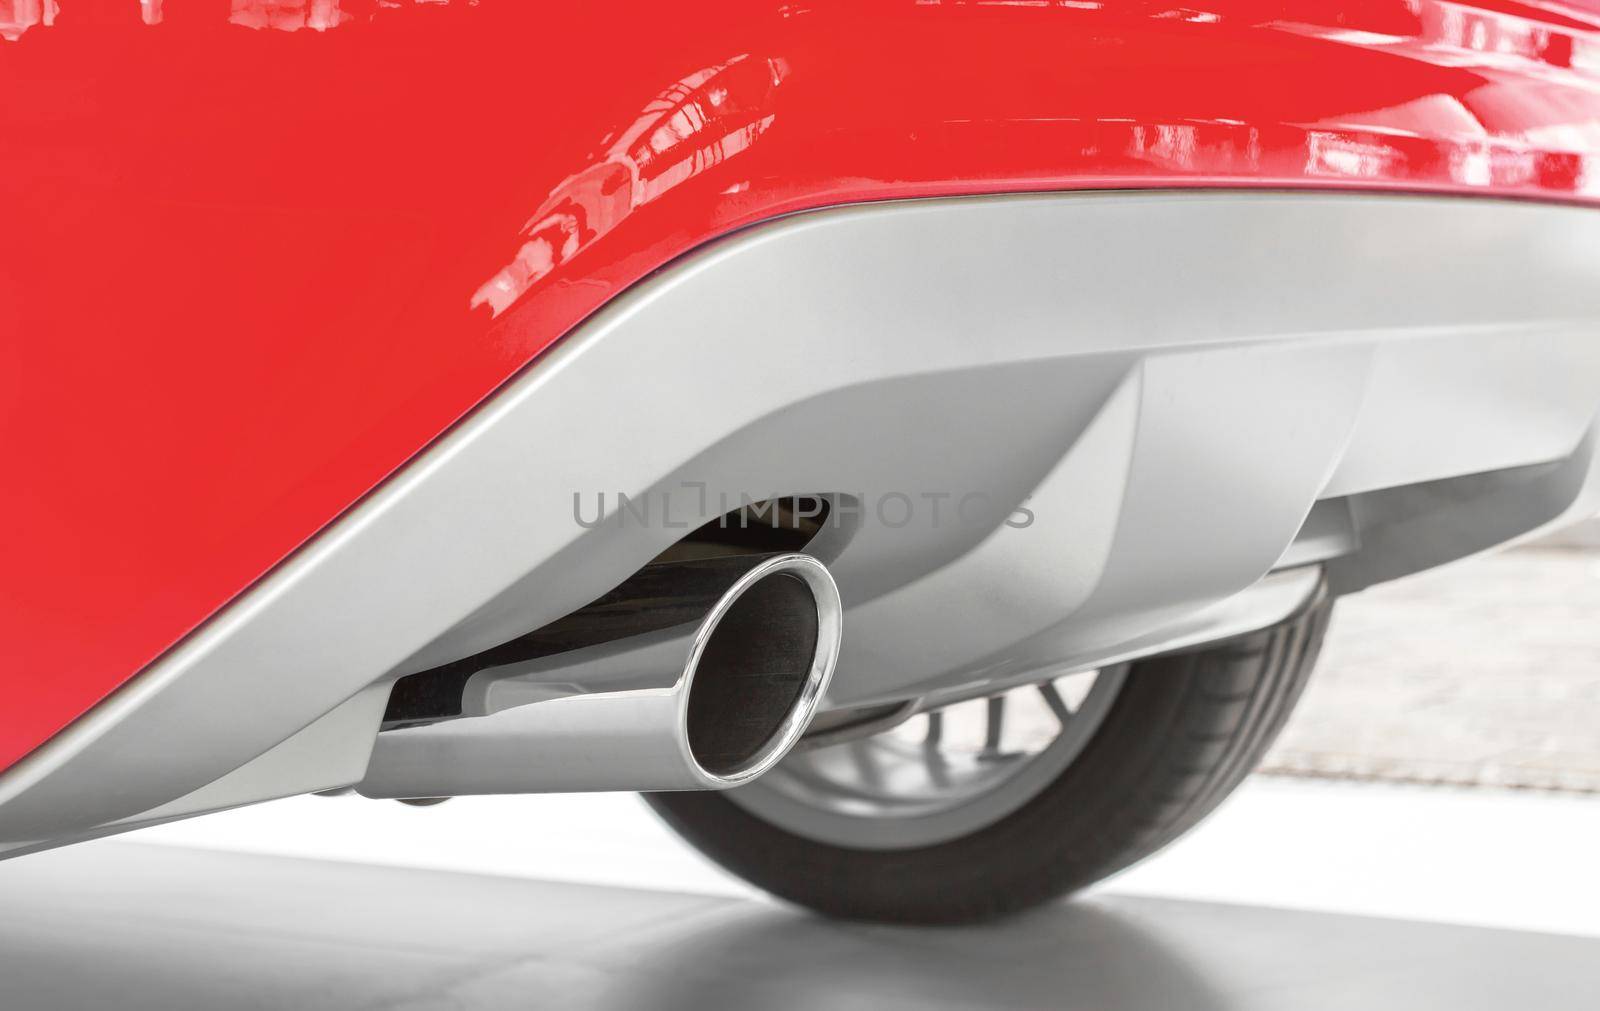 New exhaust of a sports car. Ecology concept, low emission, low environmental impact.